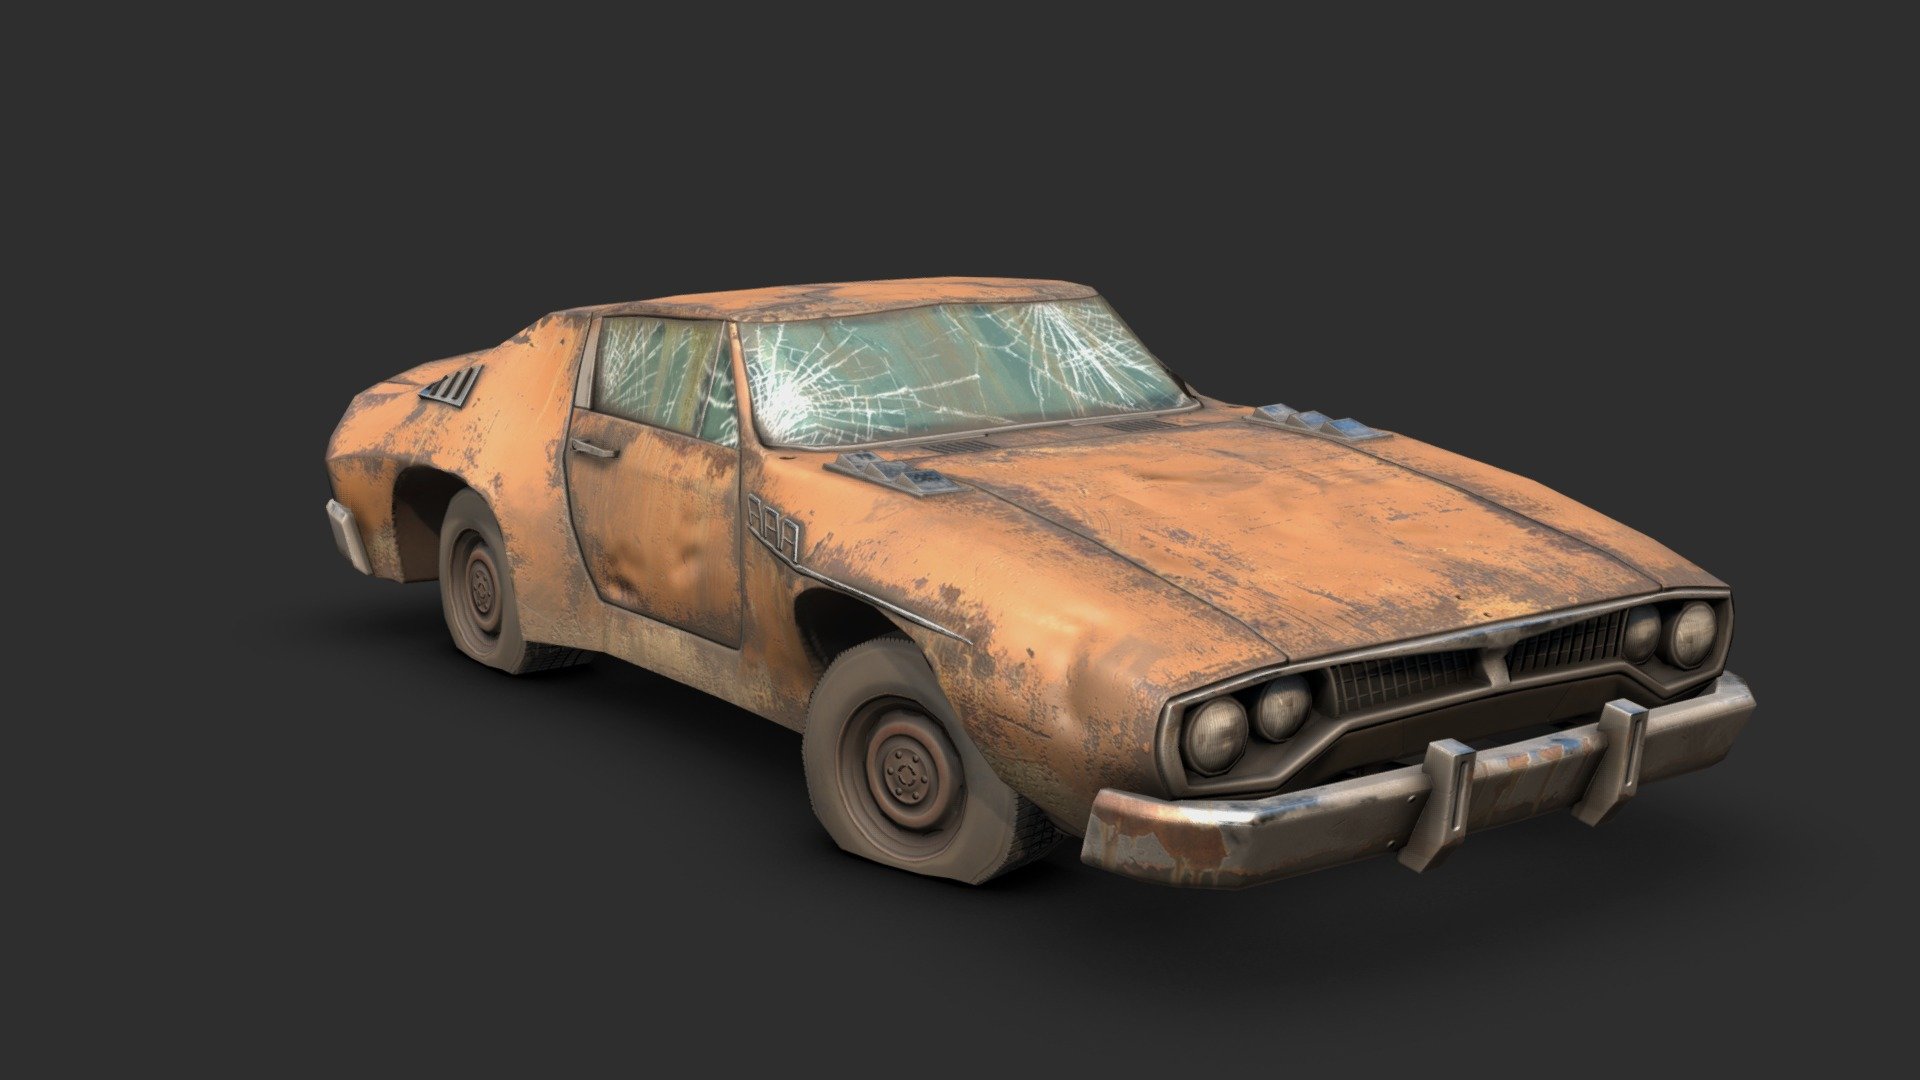 A wrecked version of the Argonaut car. It's a common sight in the wastelands of the Electric Sheep film I'm doing some models for.

Made with 3DSMax and Substance Painter 3d model